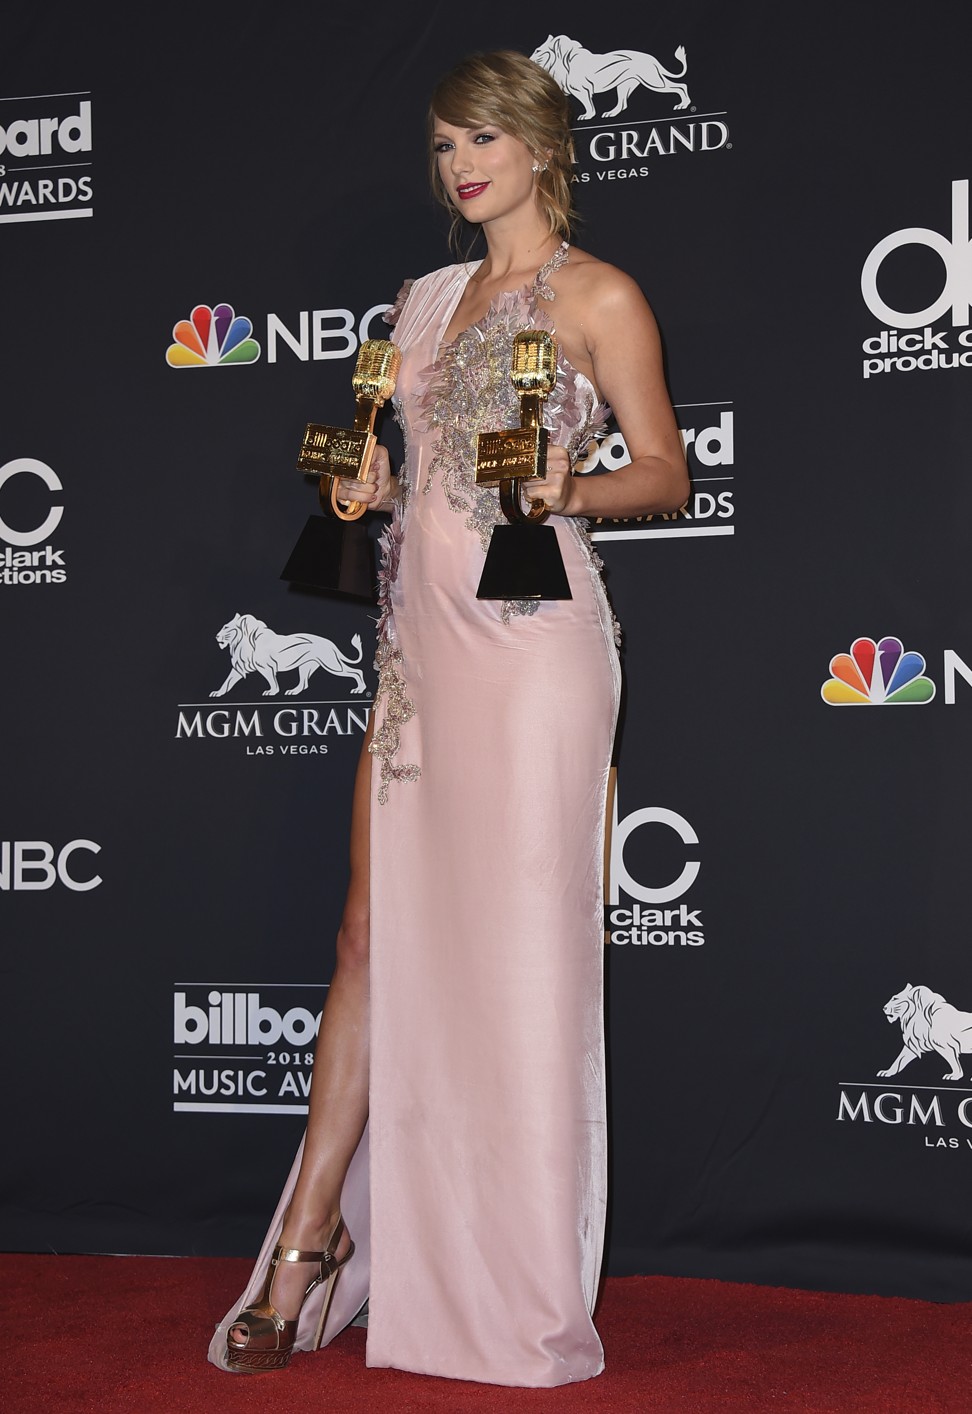 Taylor Swift won Top Female Artist and Top Selling Album for ‘reputation’ at the Billboard Music Awards. Photo: Jordan Strauss/Invision/AP